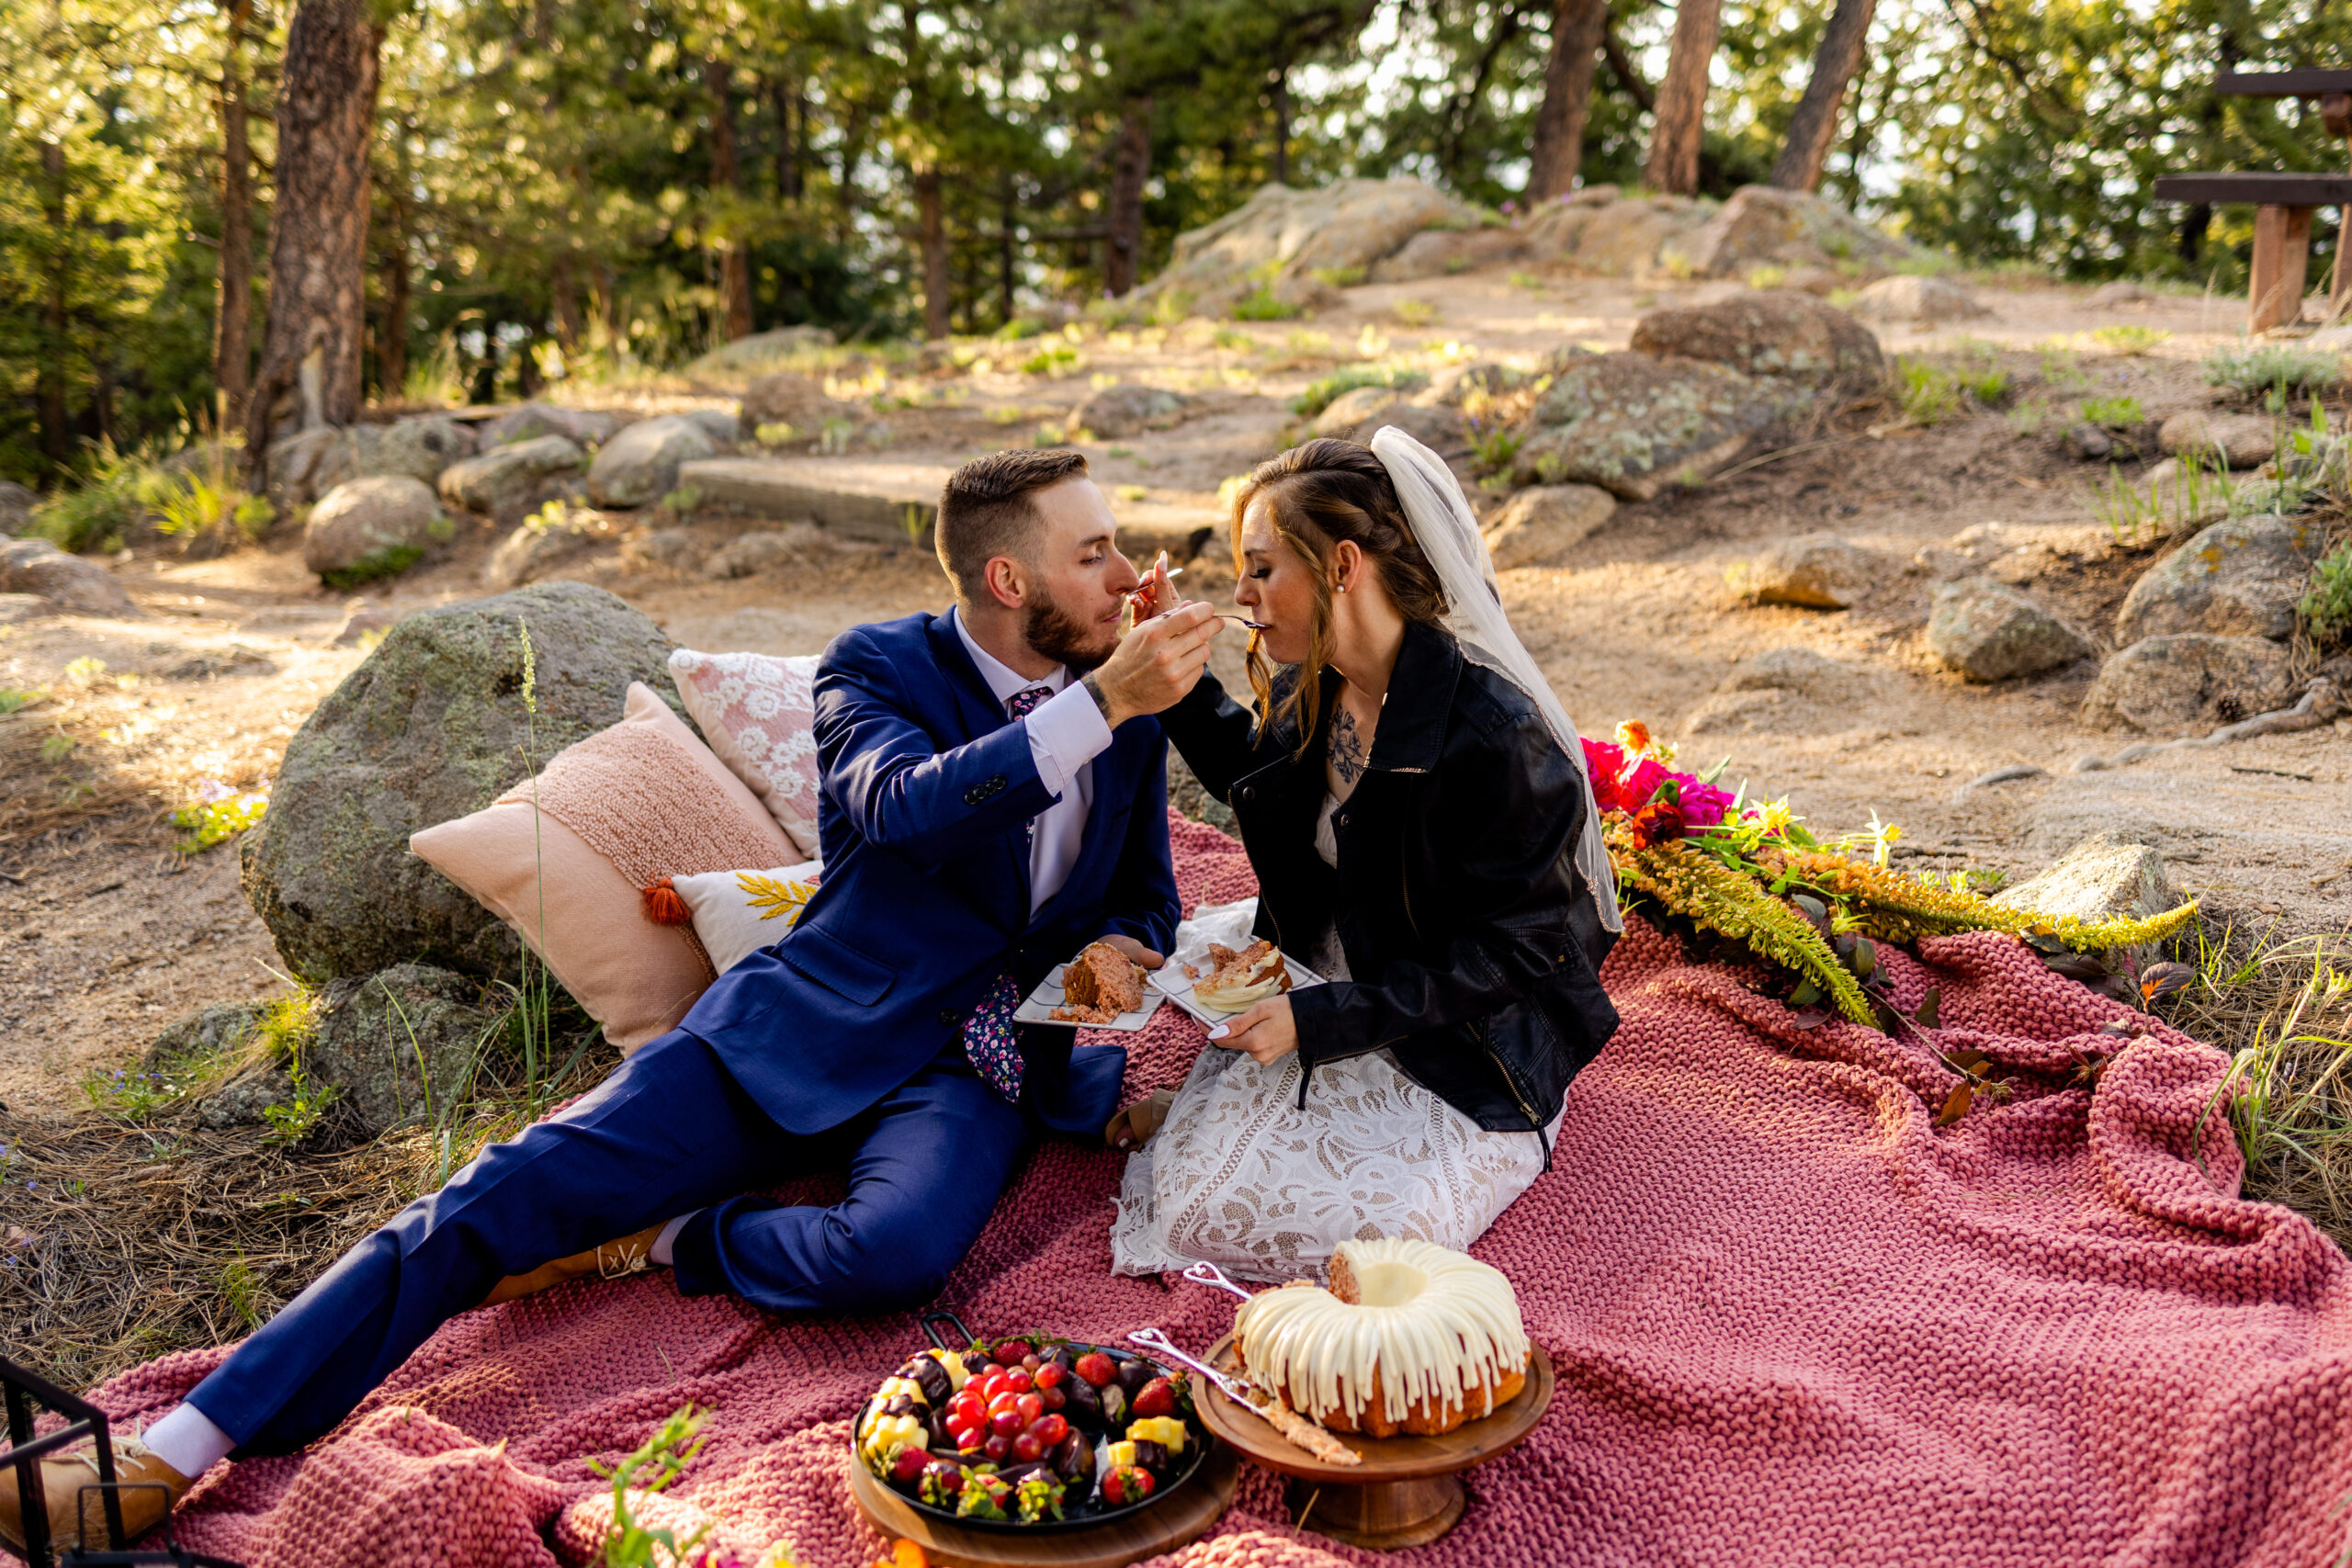 The bride and groom feeding each other cake at their picnic at Artist Point after their Sunrise Amphitheater elopement ceremony. 